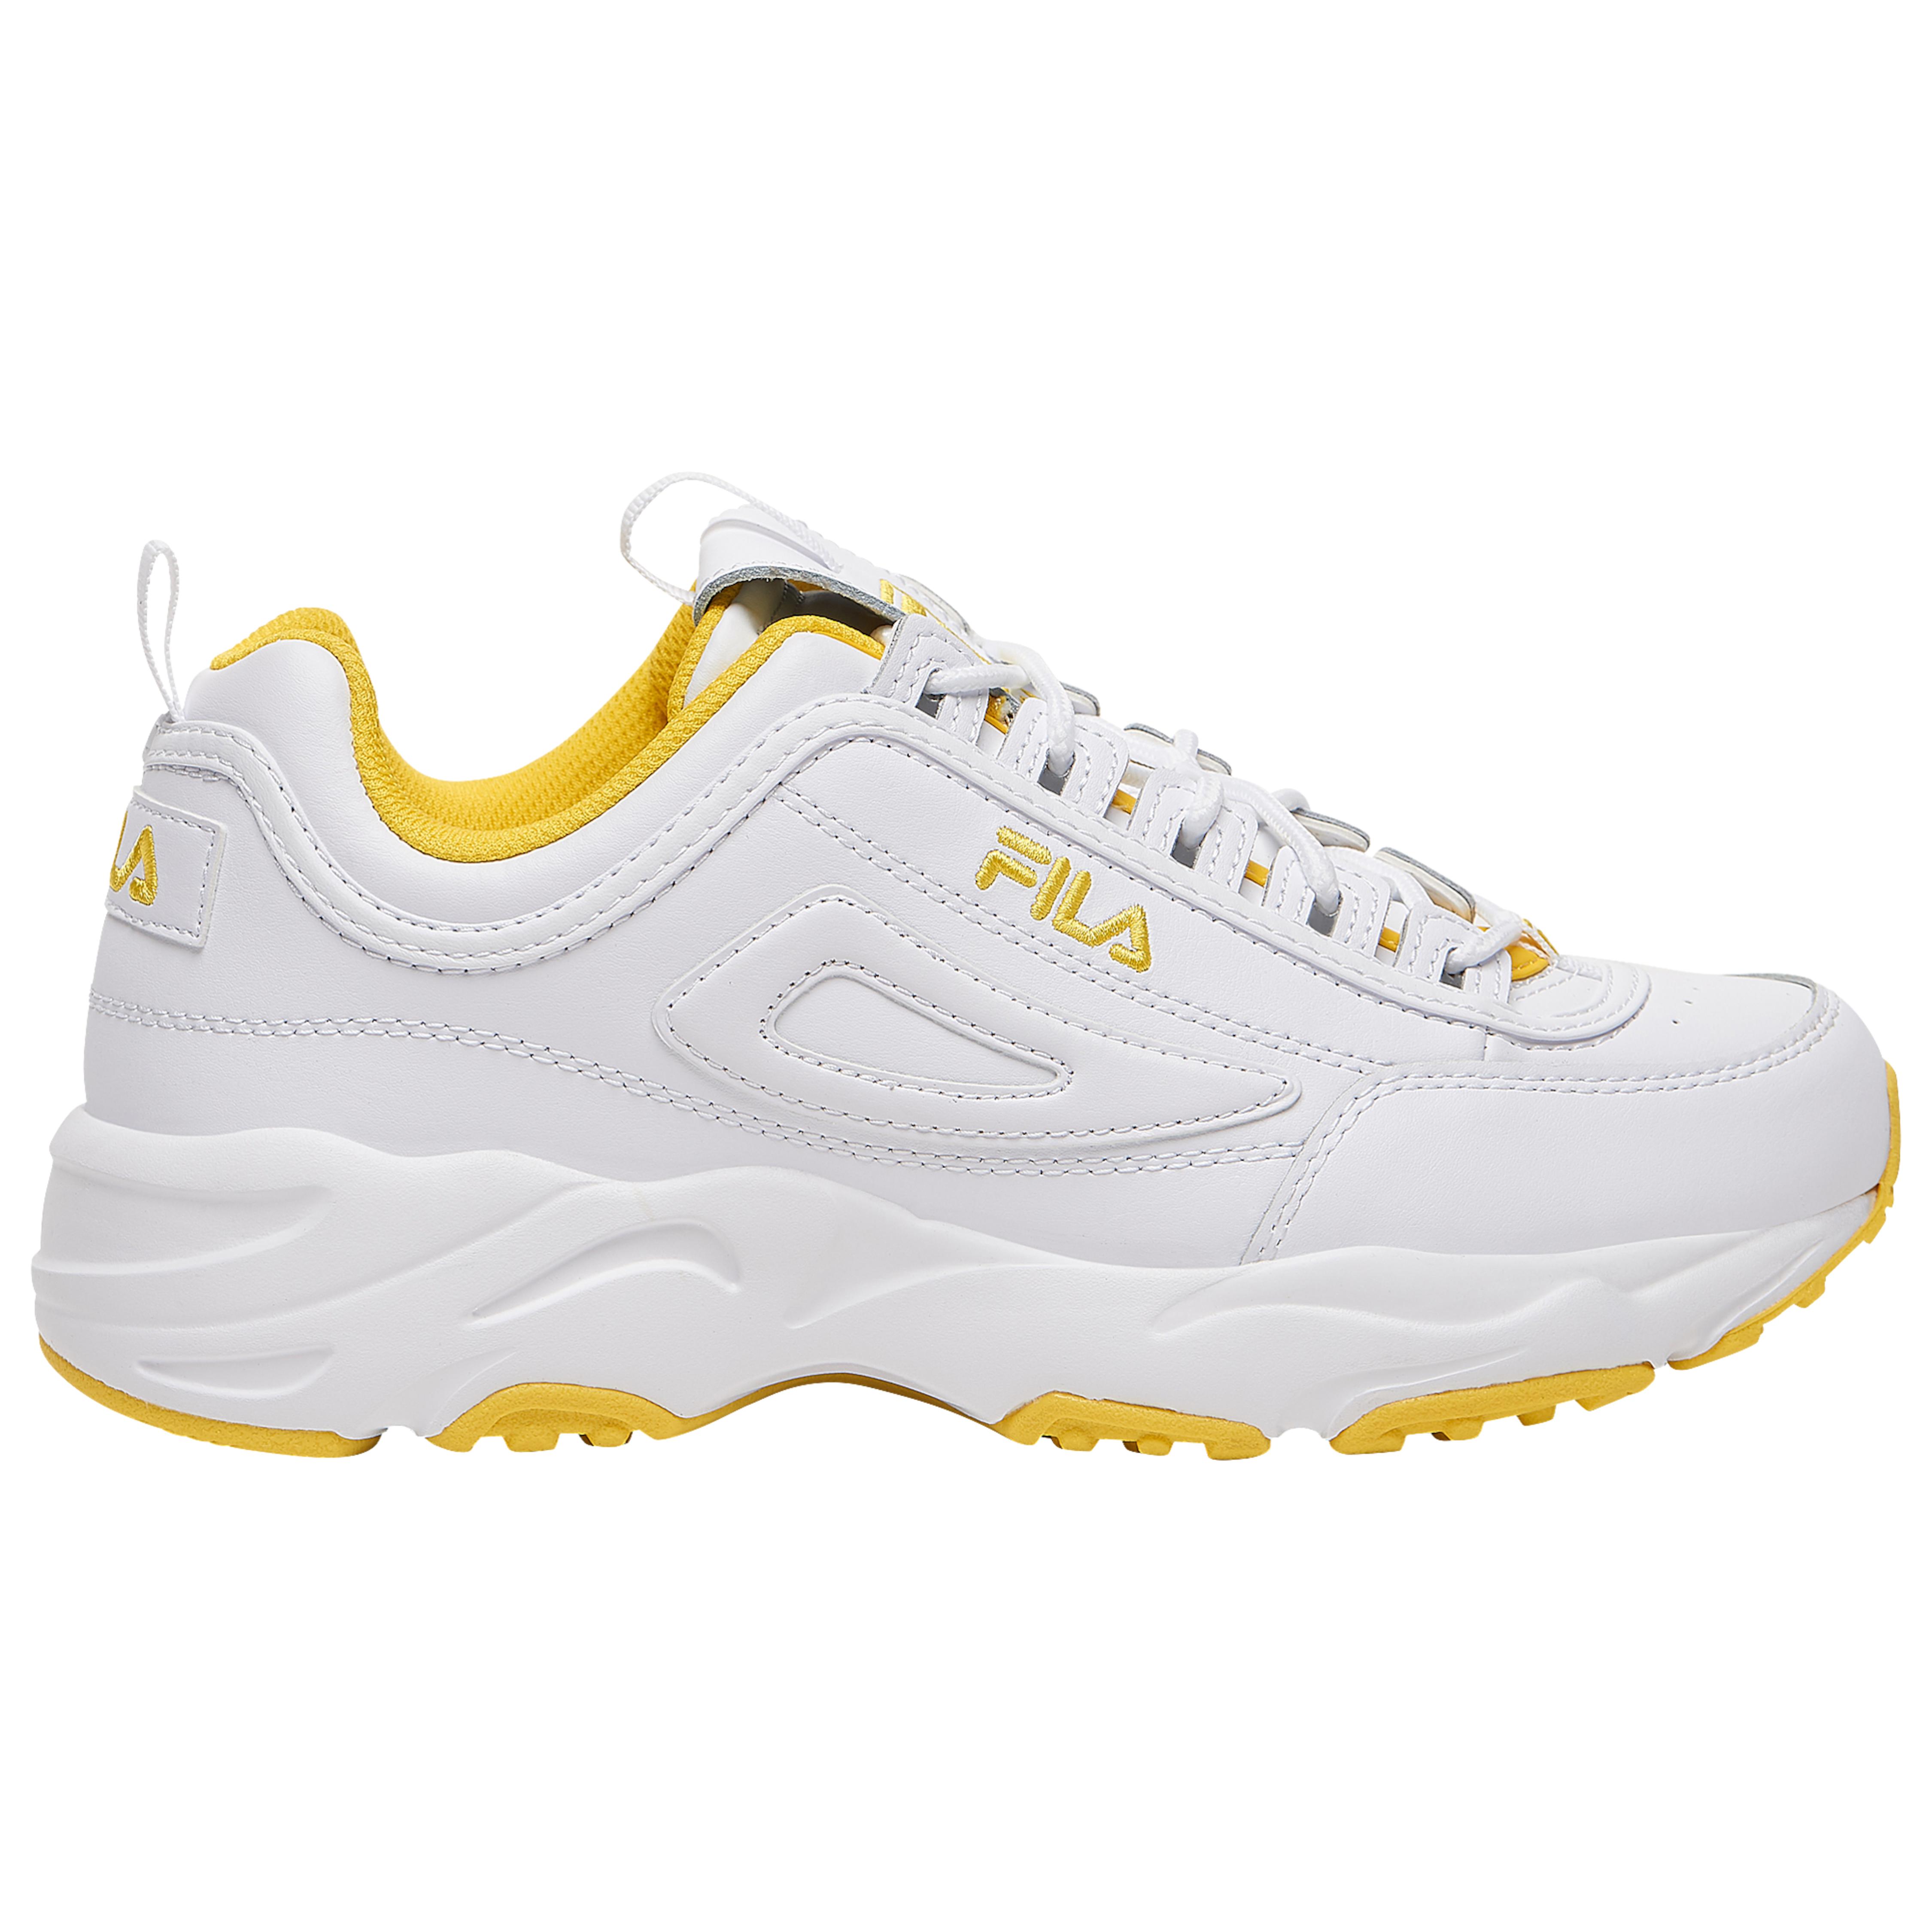 Fila Suede Disruptor Ii X Ray Tracer in White/White (White) for Men - Lyst